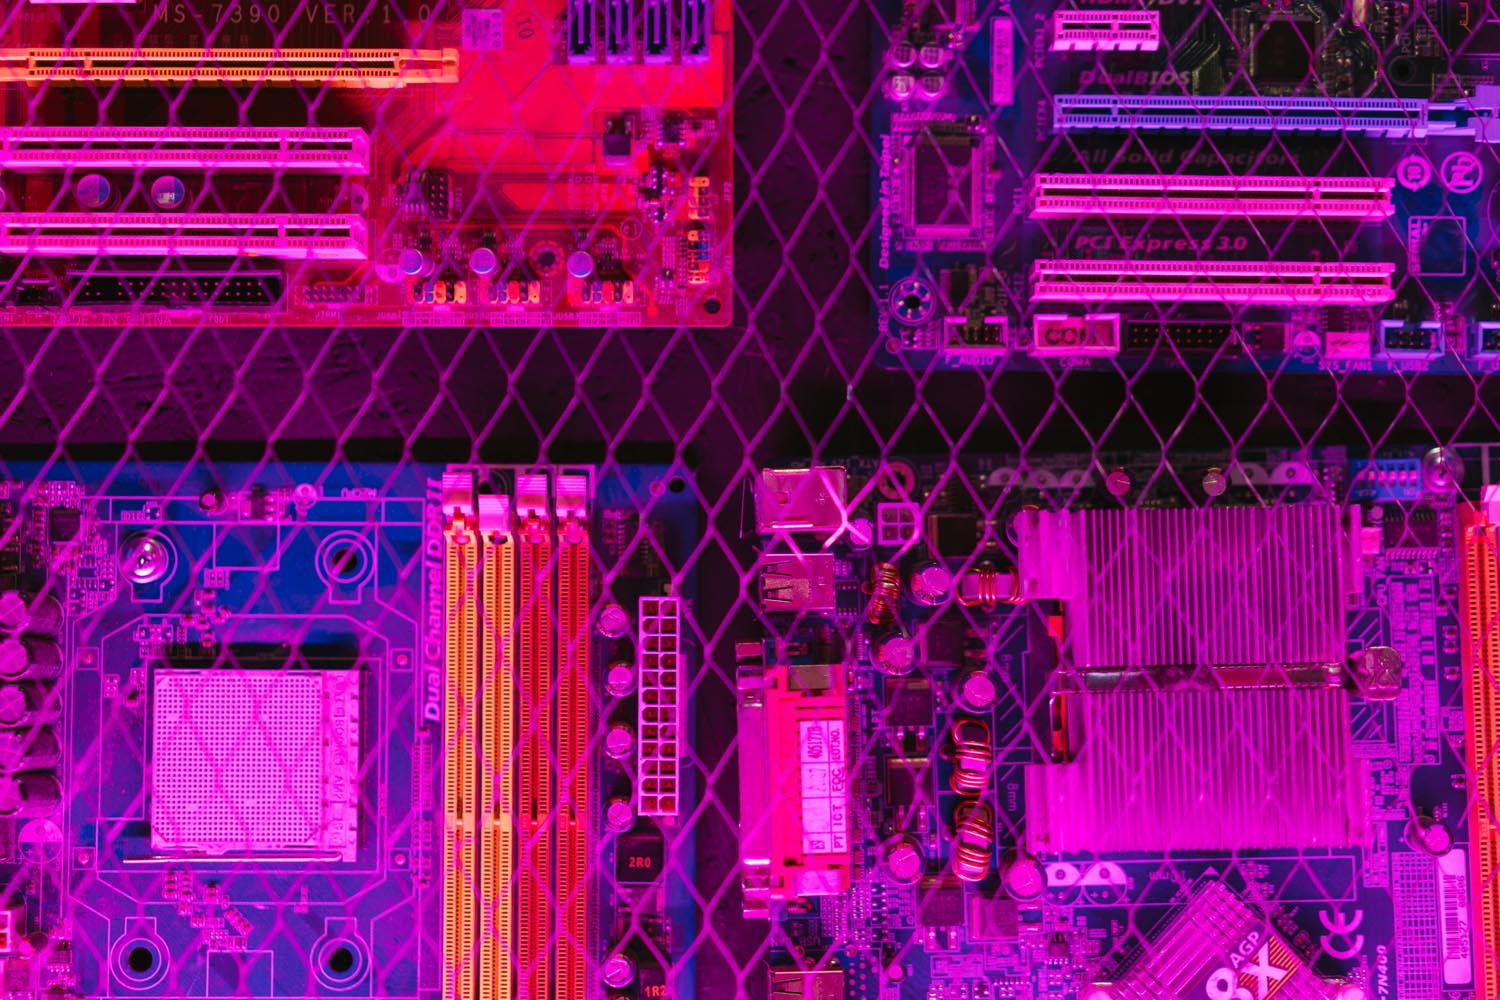 Computer motherboards behind wire fence lit with neon lights